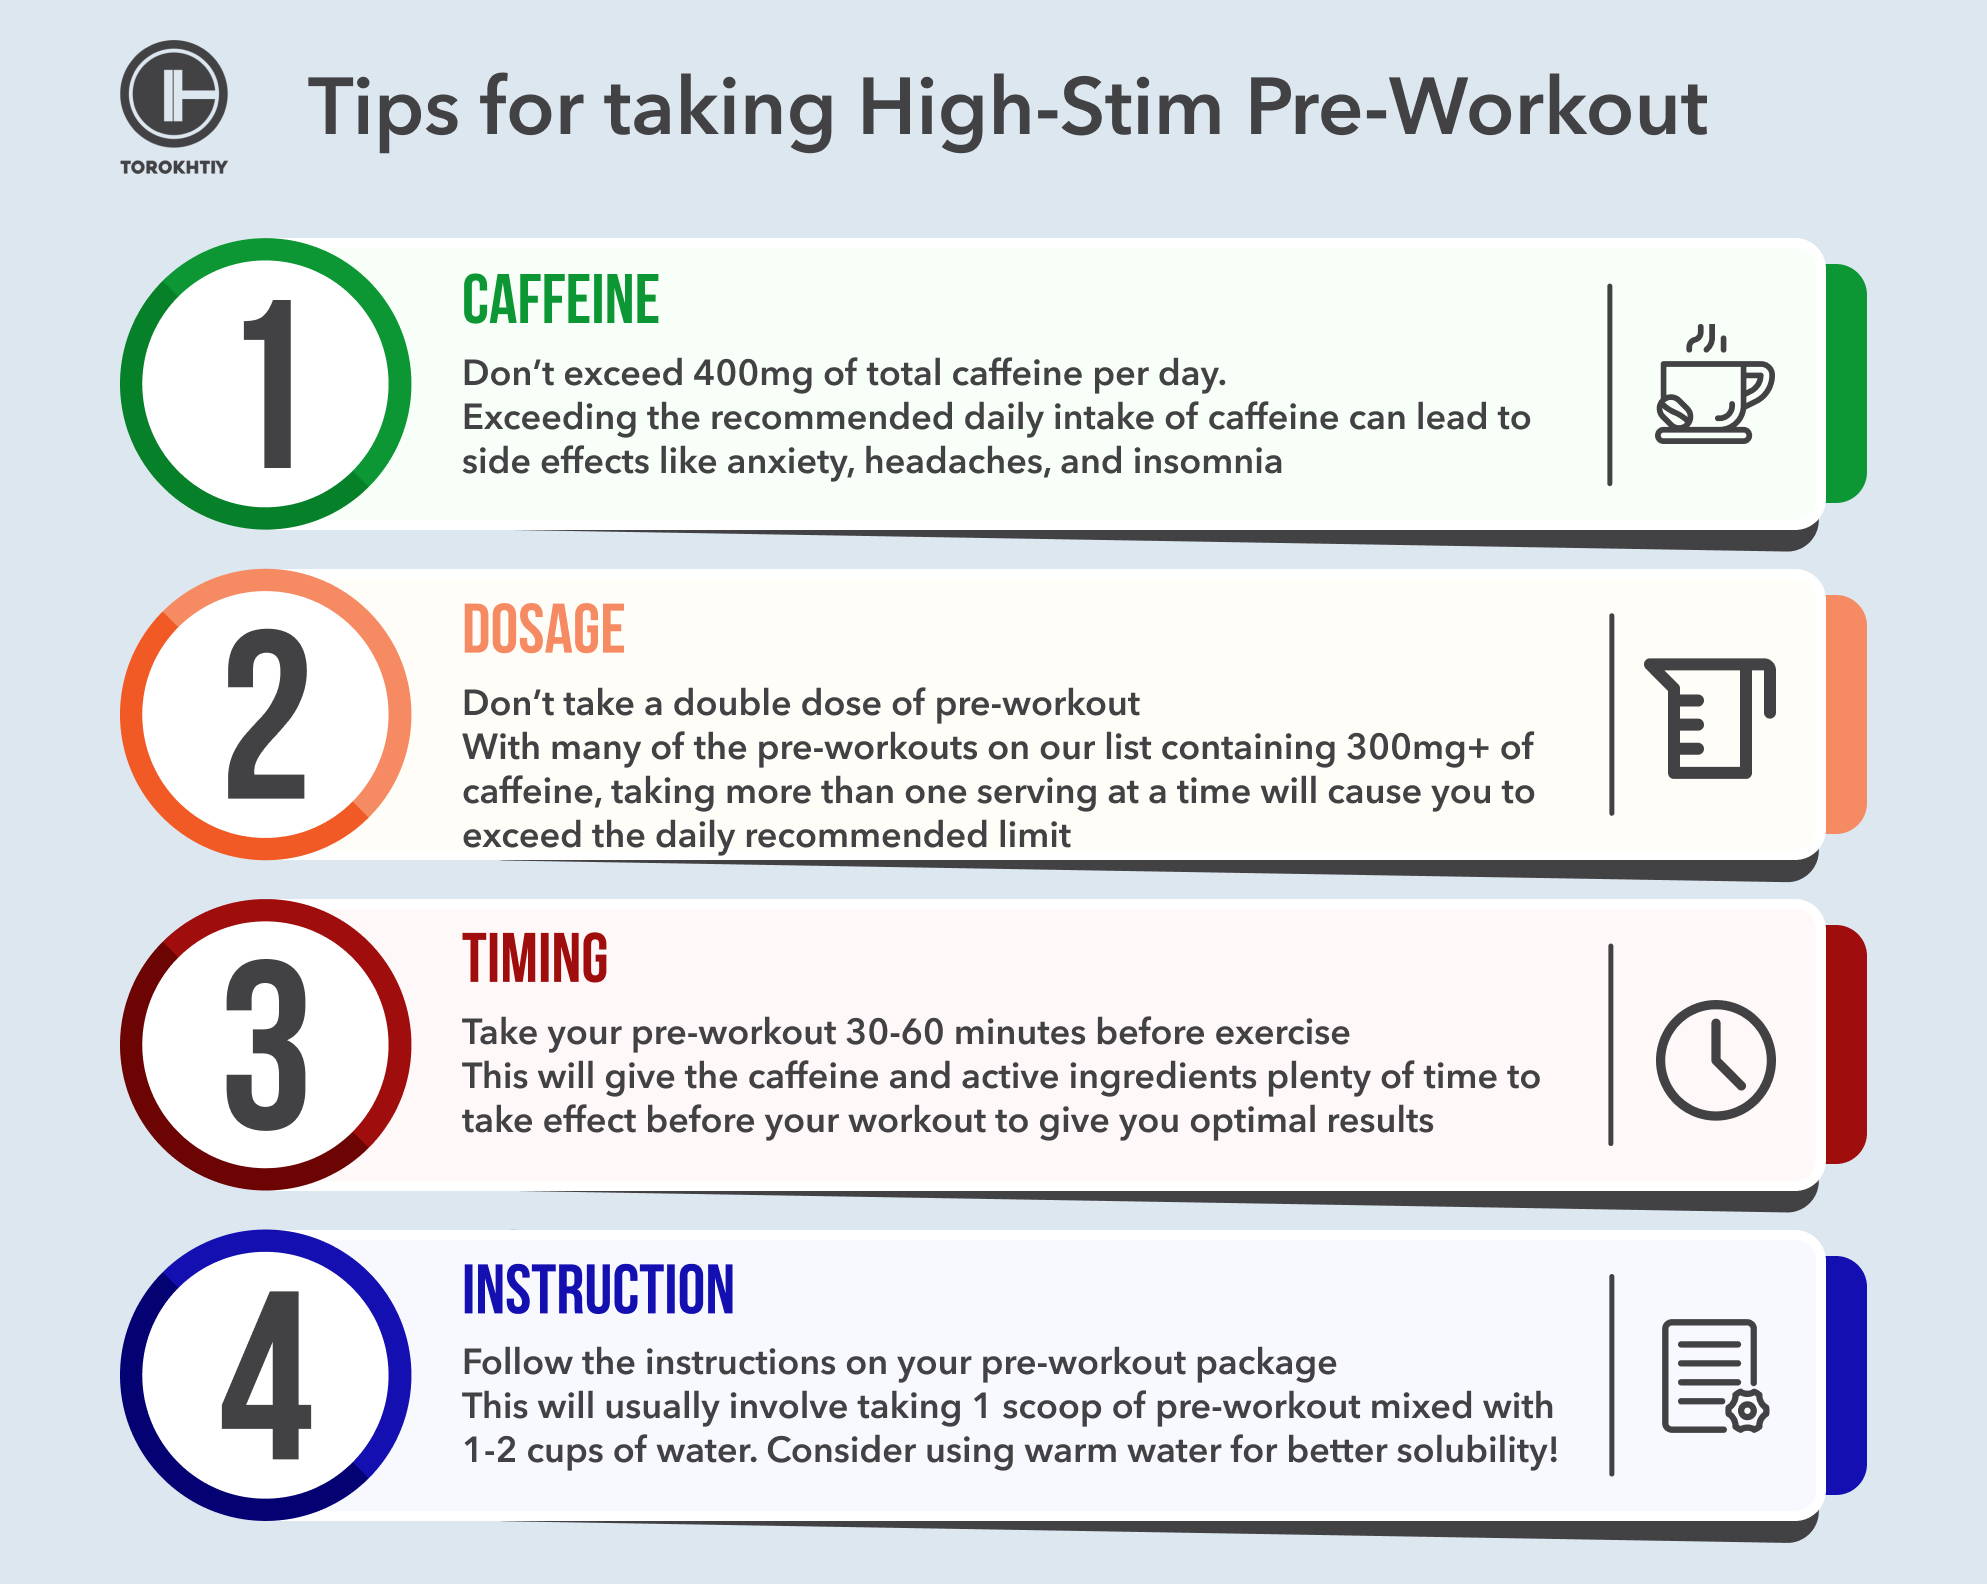 tips for taking high-stim pre-workout